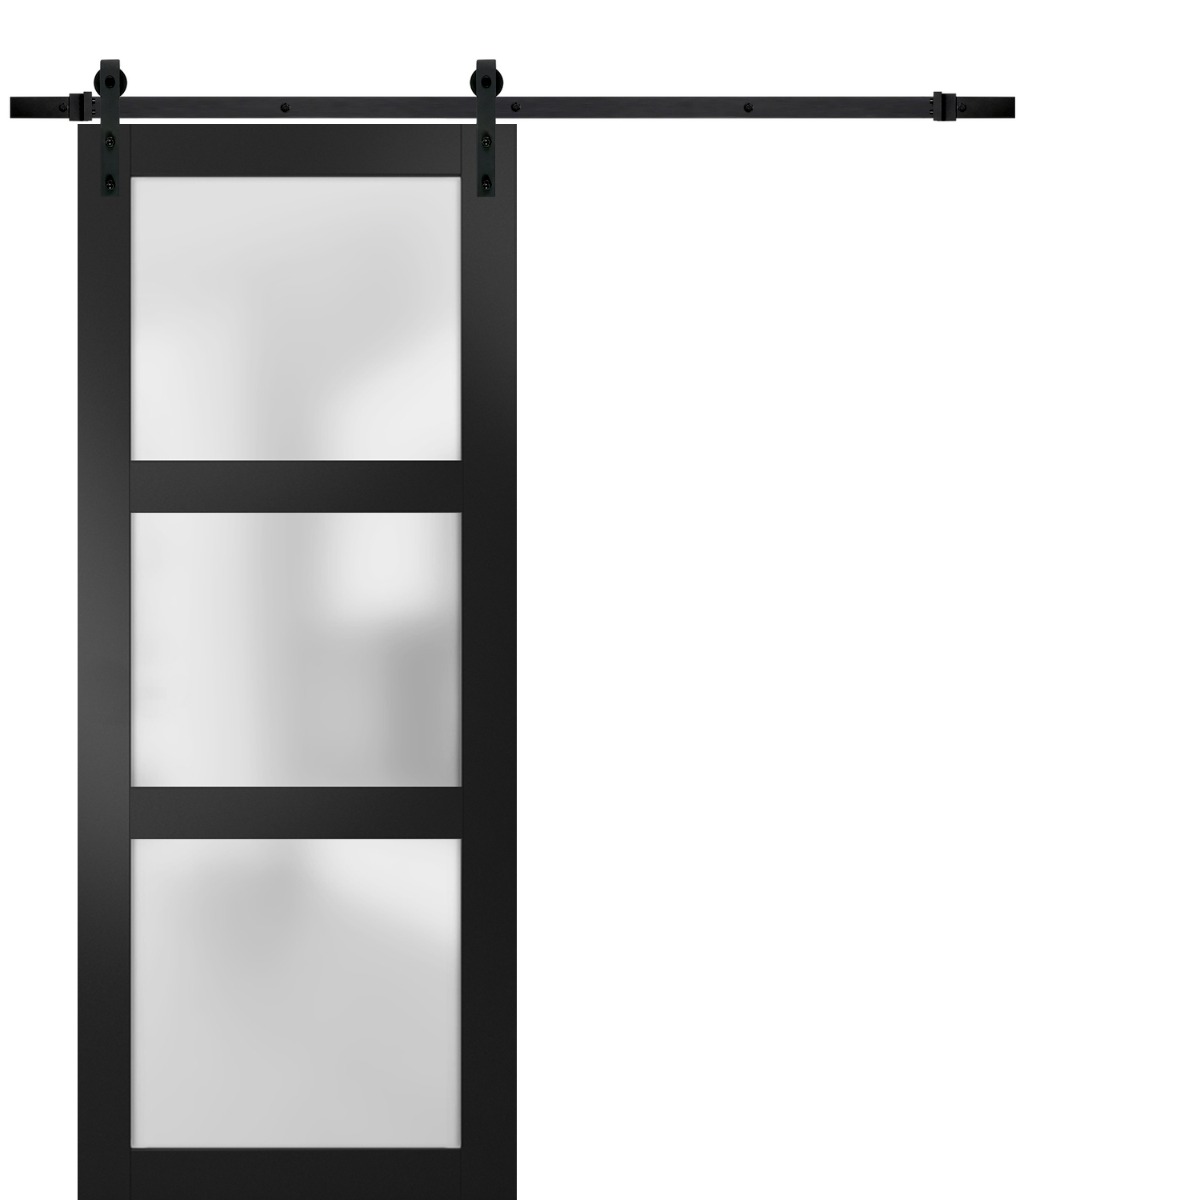 Sturdy Barn Door | Lucia 2552 Matte Black with Frosted Glass | 6.6FT Rail Hangers Heavy Hardware Set